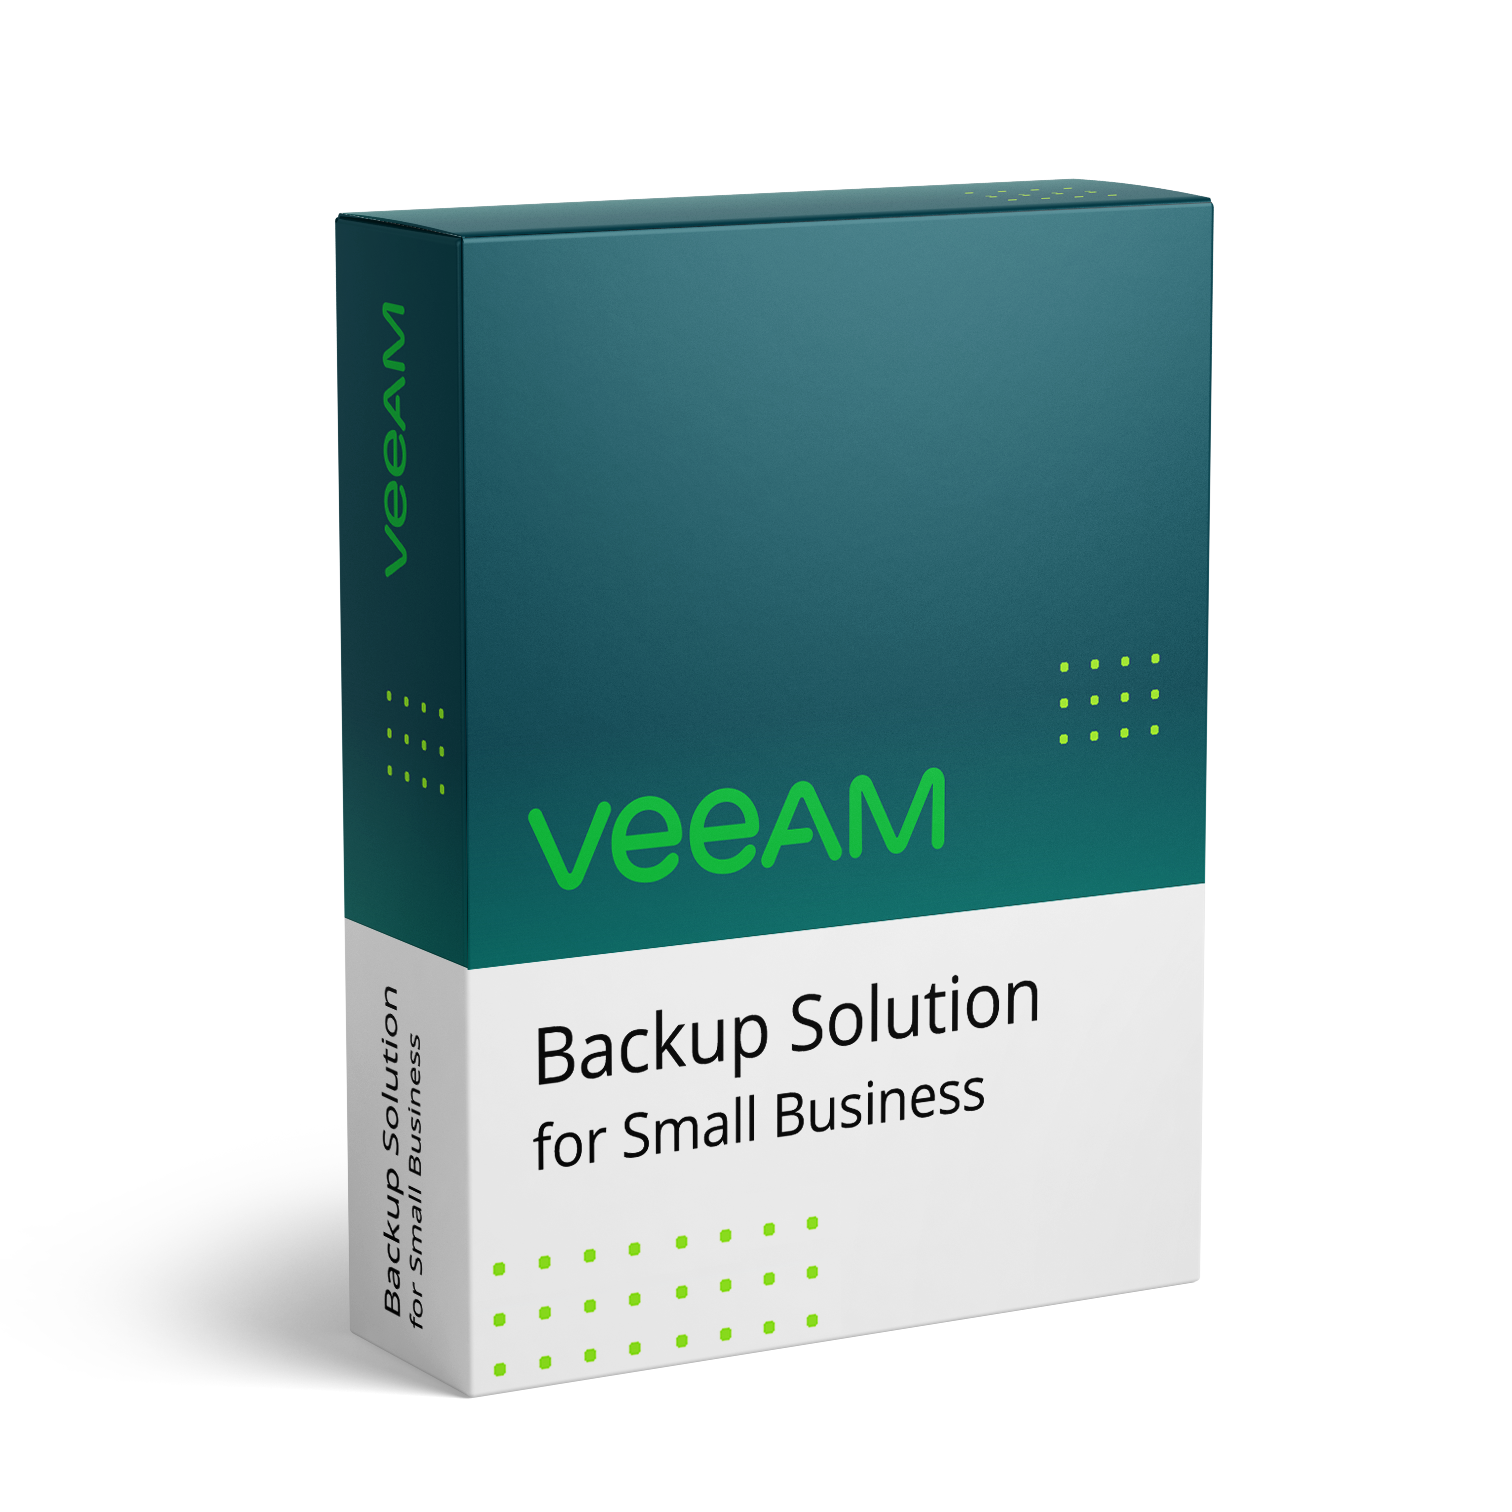 Veeam for small business